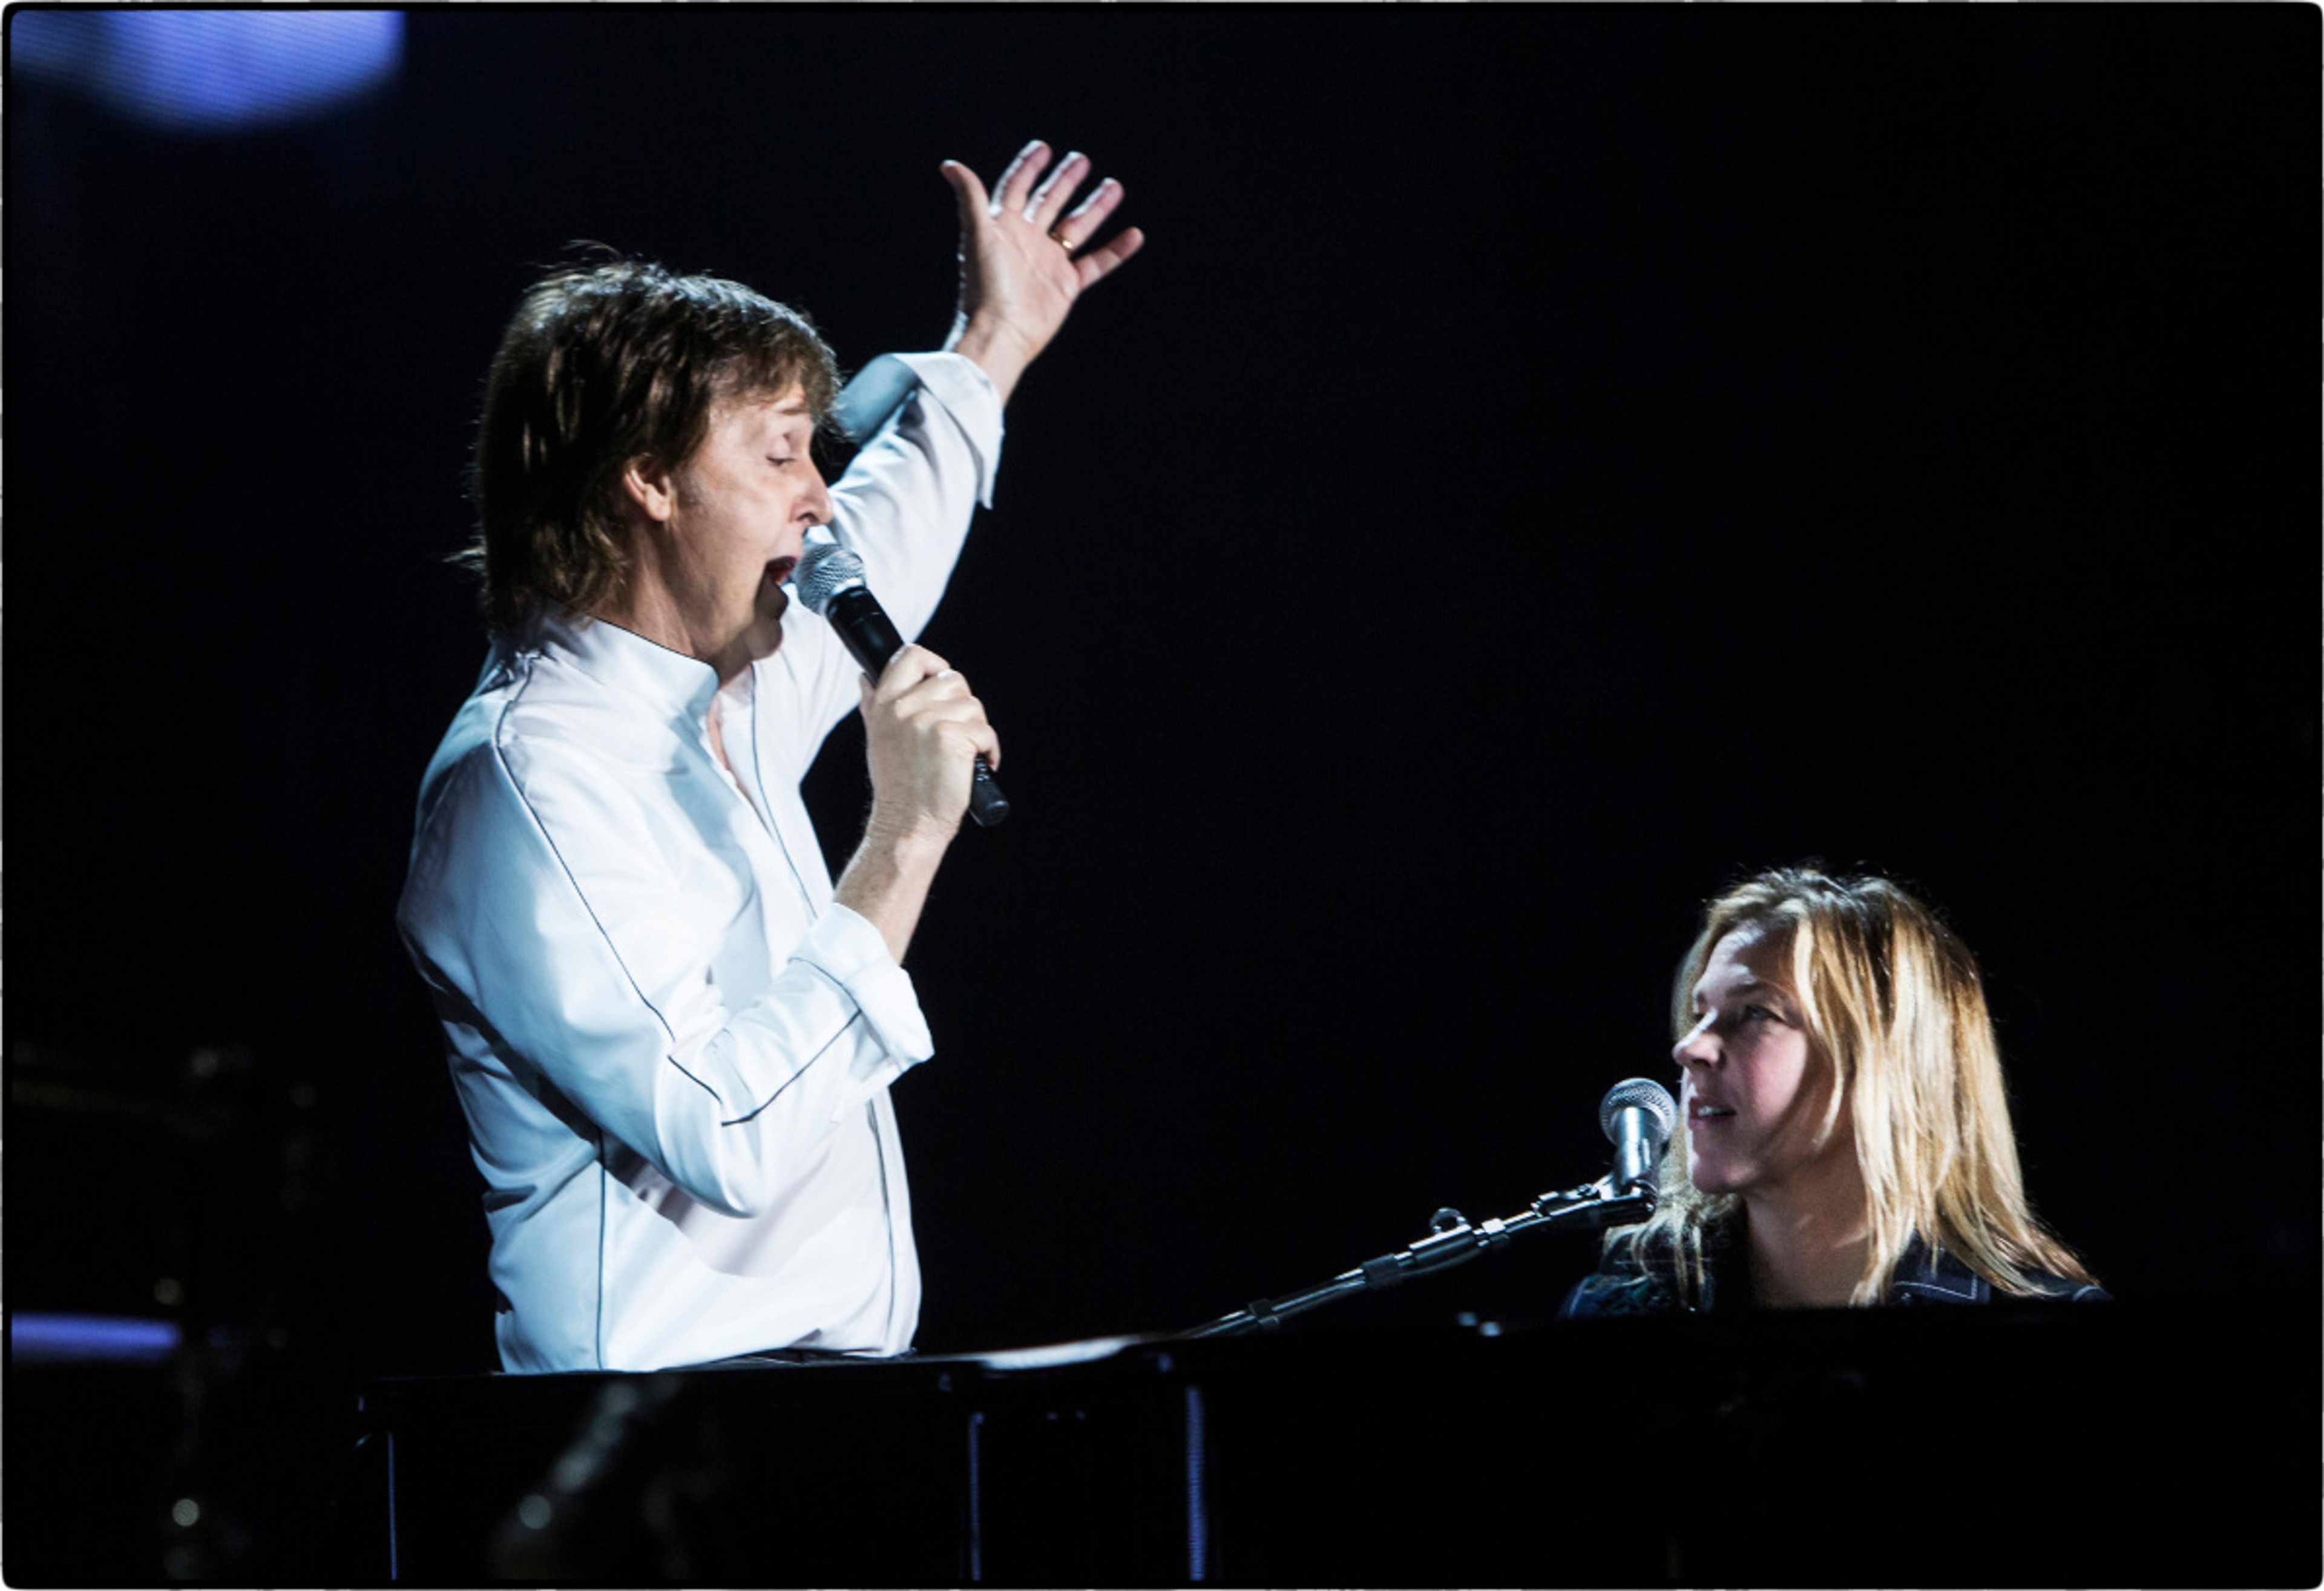 Paul performing with Diana Krall at the Rogers Arena, Vancouver